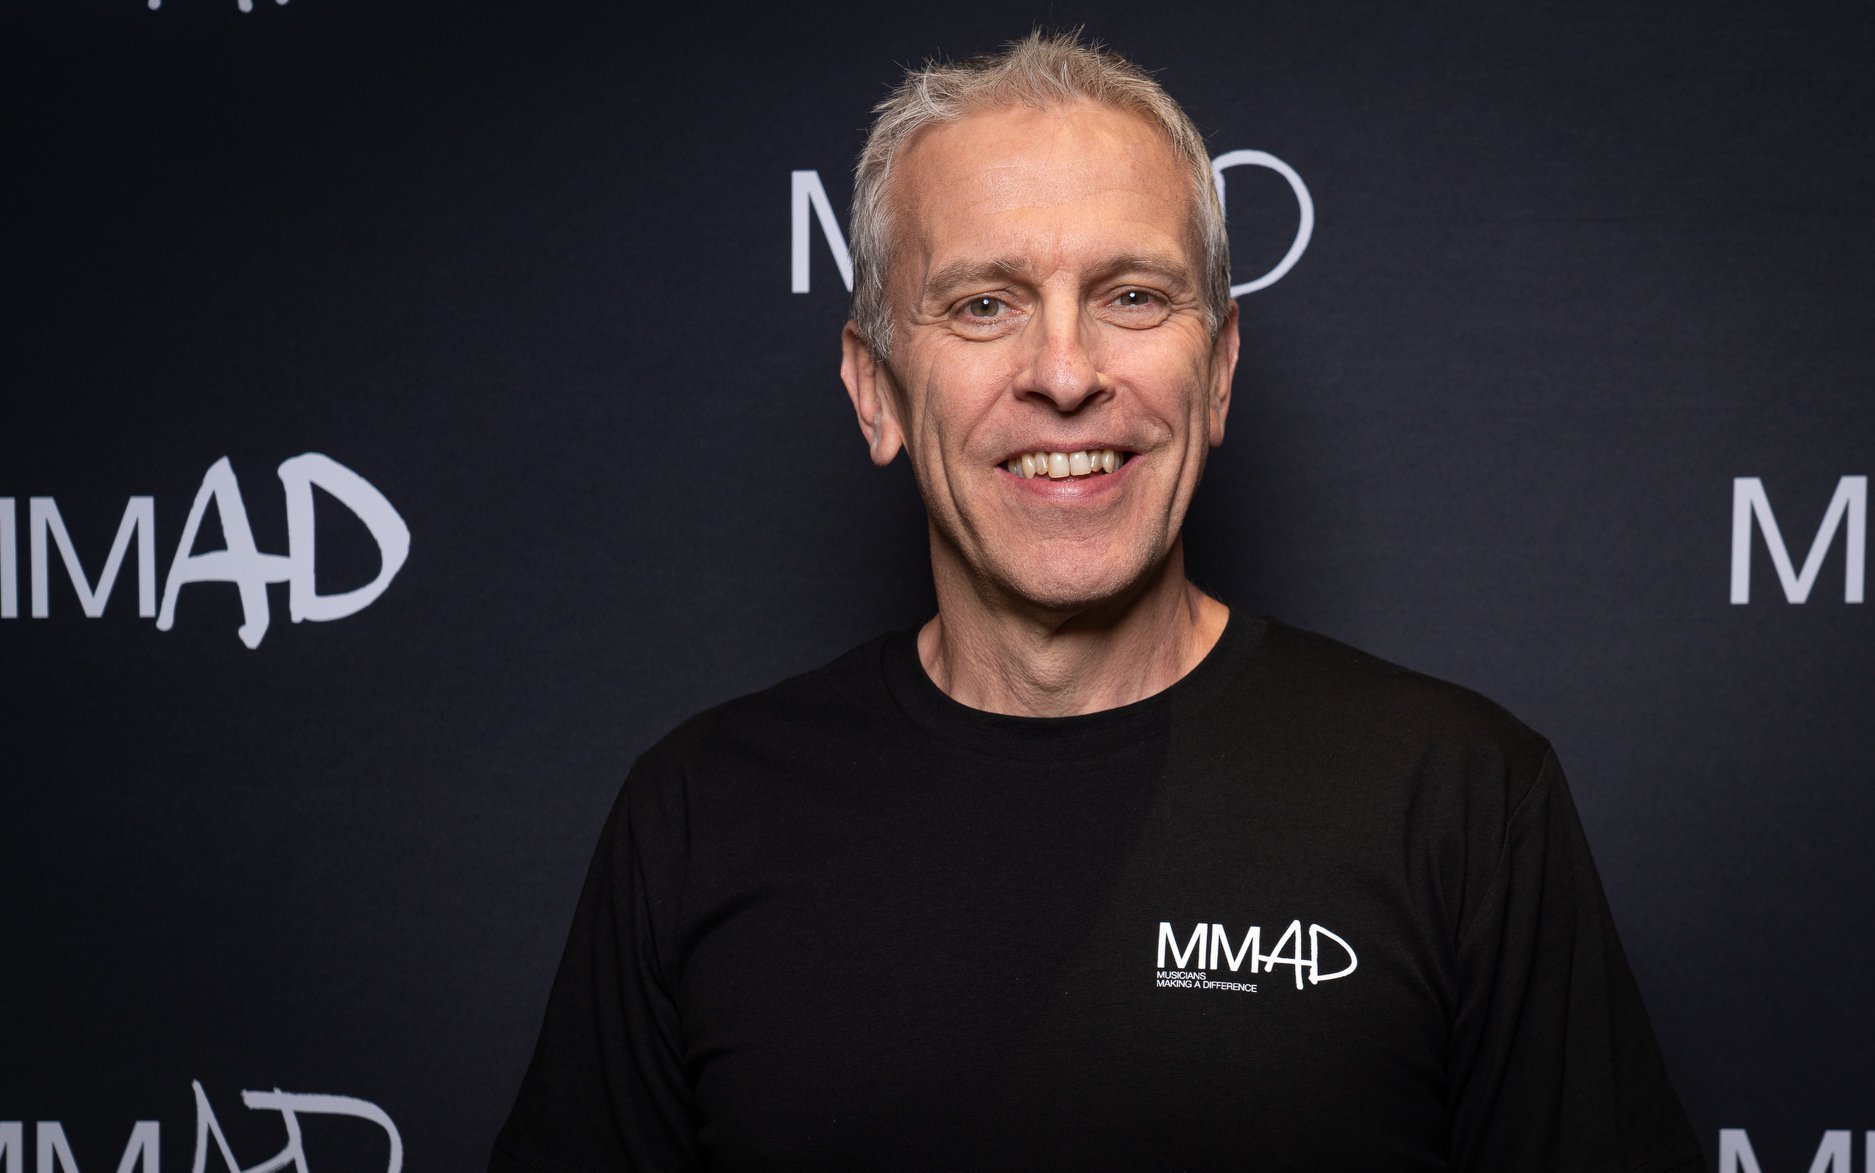 MMAD elects former iHeart COO Geraint Davies as chair